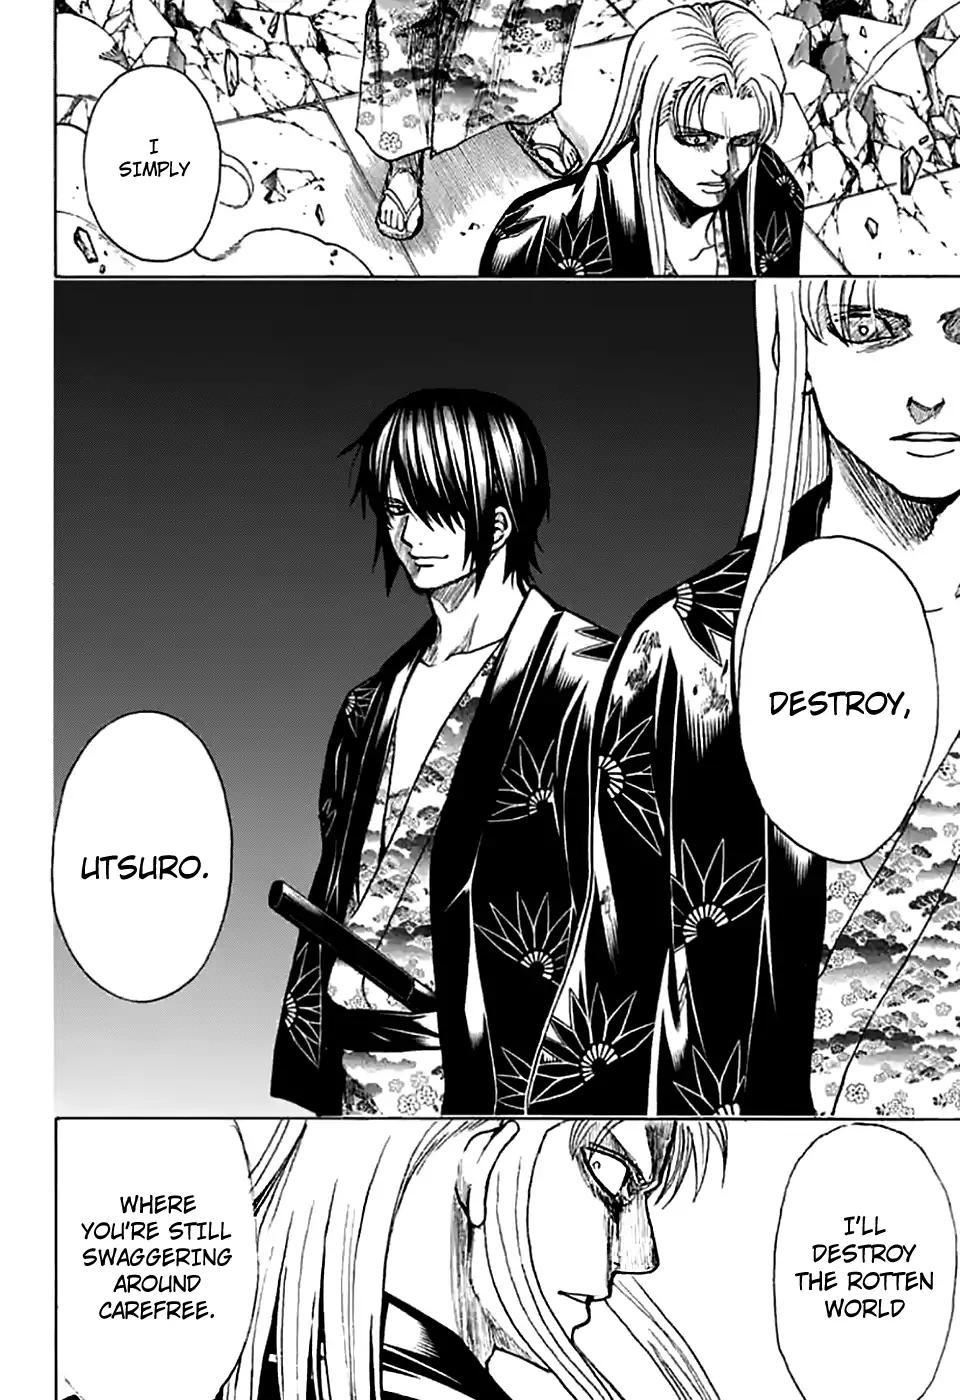 Gintama chapter 703 page 6